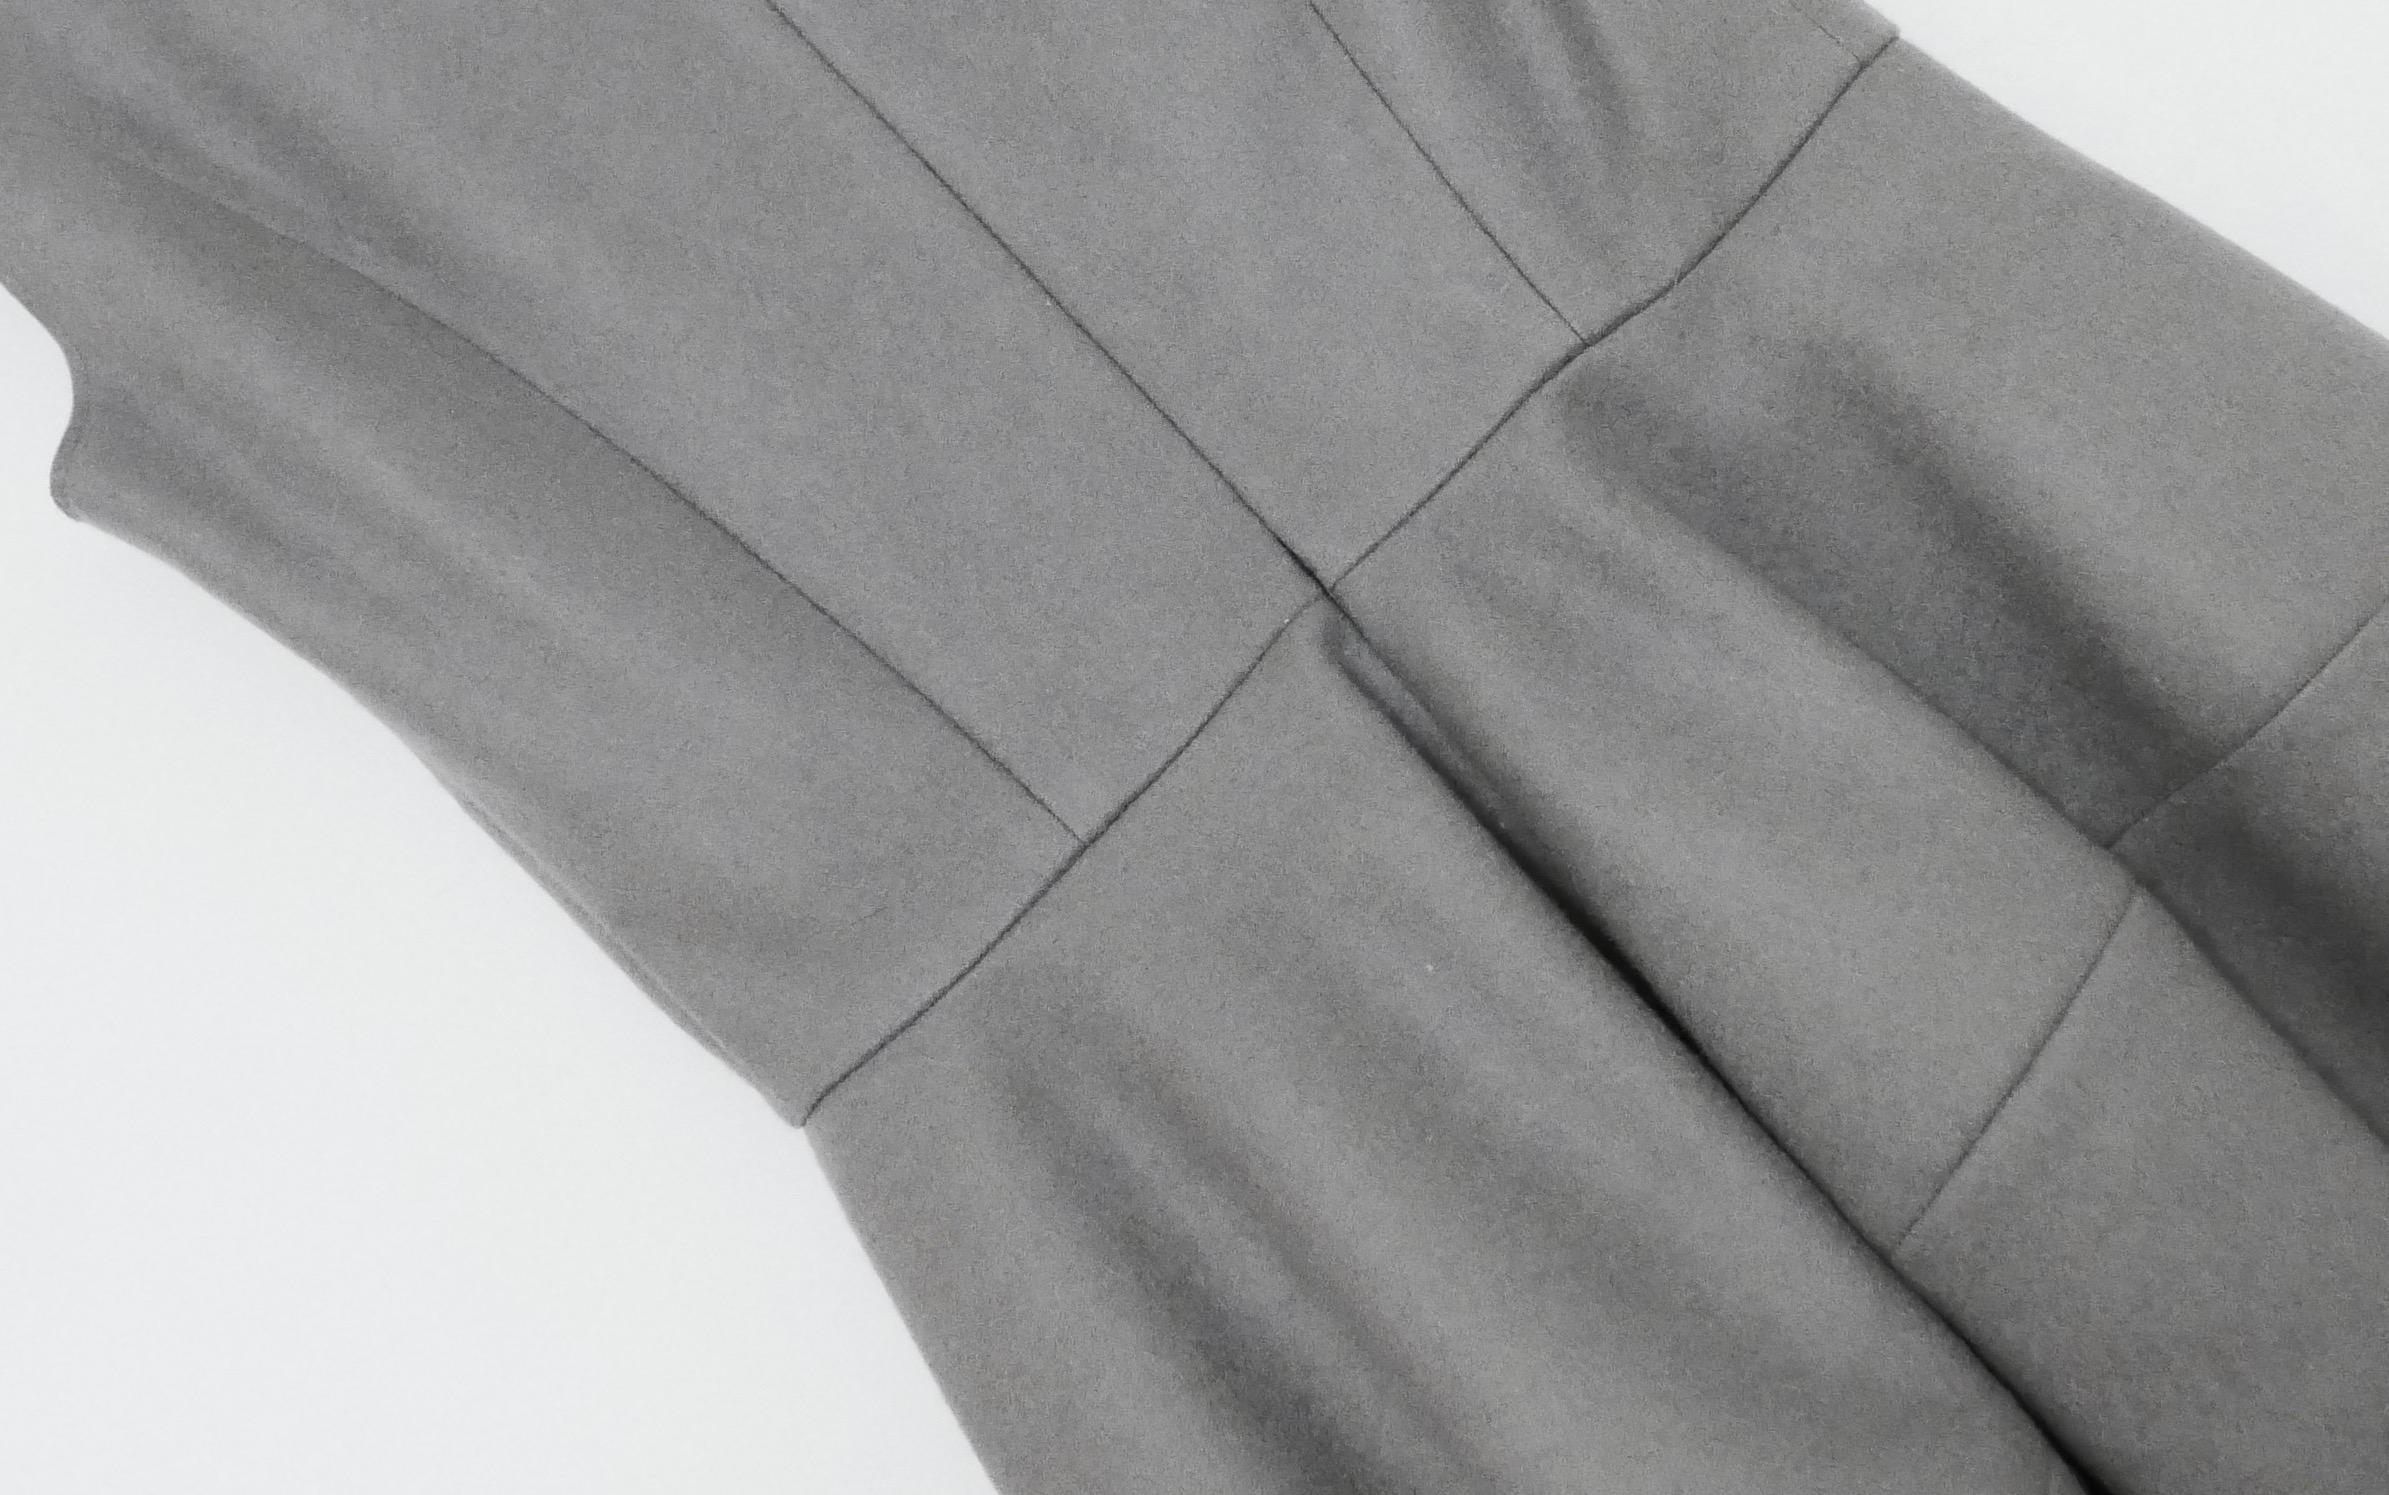 Yves Saint Laurent x Stefano Pilati 2008 Grey Cashmere Bell Skirt Dress In New Condition For Sale In London, GB